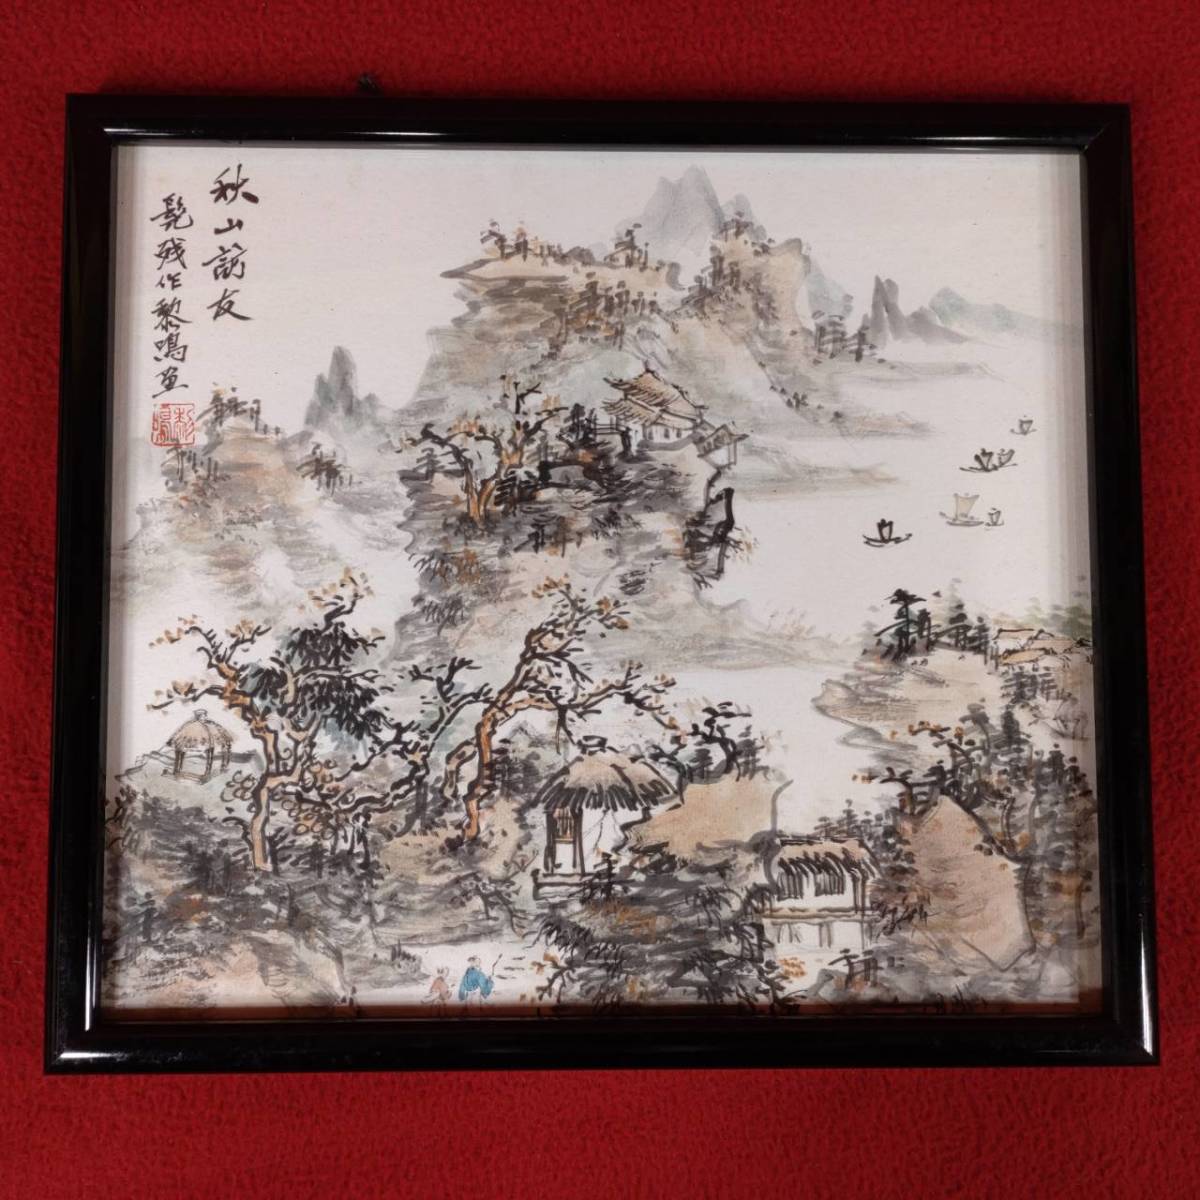 Akiyama Visiting Friends, Higezan, Liming Painting, Painting Colored Paper, Framed, Wall Hanging, Wall Hanging Interior, Landscape Painting, Chinese Style Interior, Chinese Style, Chinese Painting and Calligraphy, Collection, Object, Artwork, Painting, Ink painting